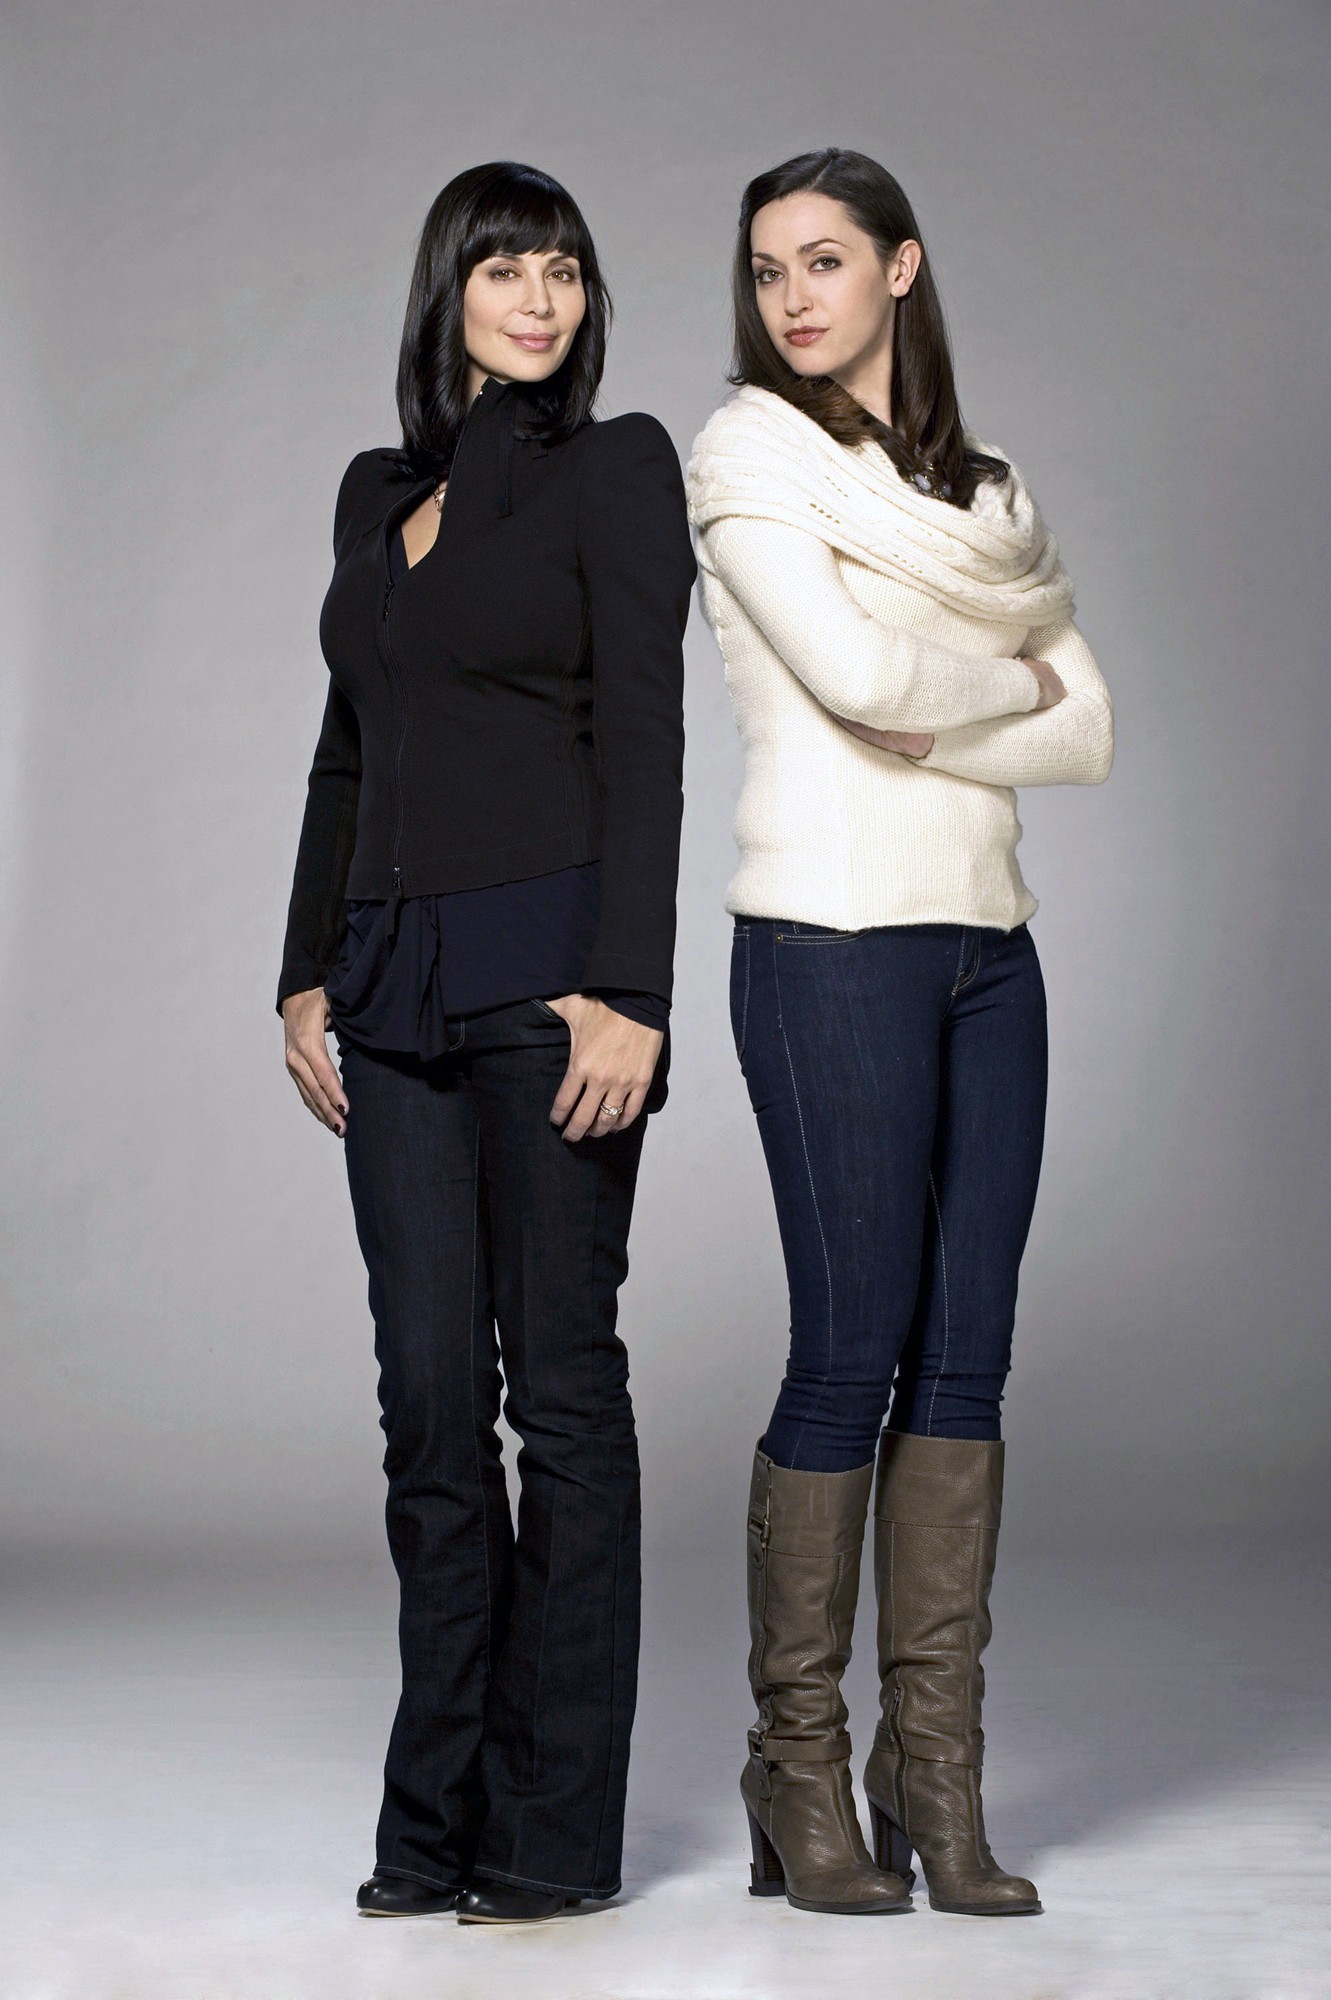 Catherine Bell stars as Cassandra Nightingale and Sarah Power stars as Abigail Pershing in Hallmark's The Good Witch's Family (2011)